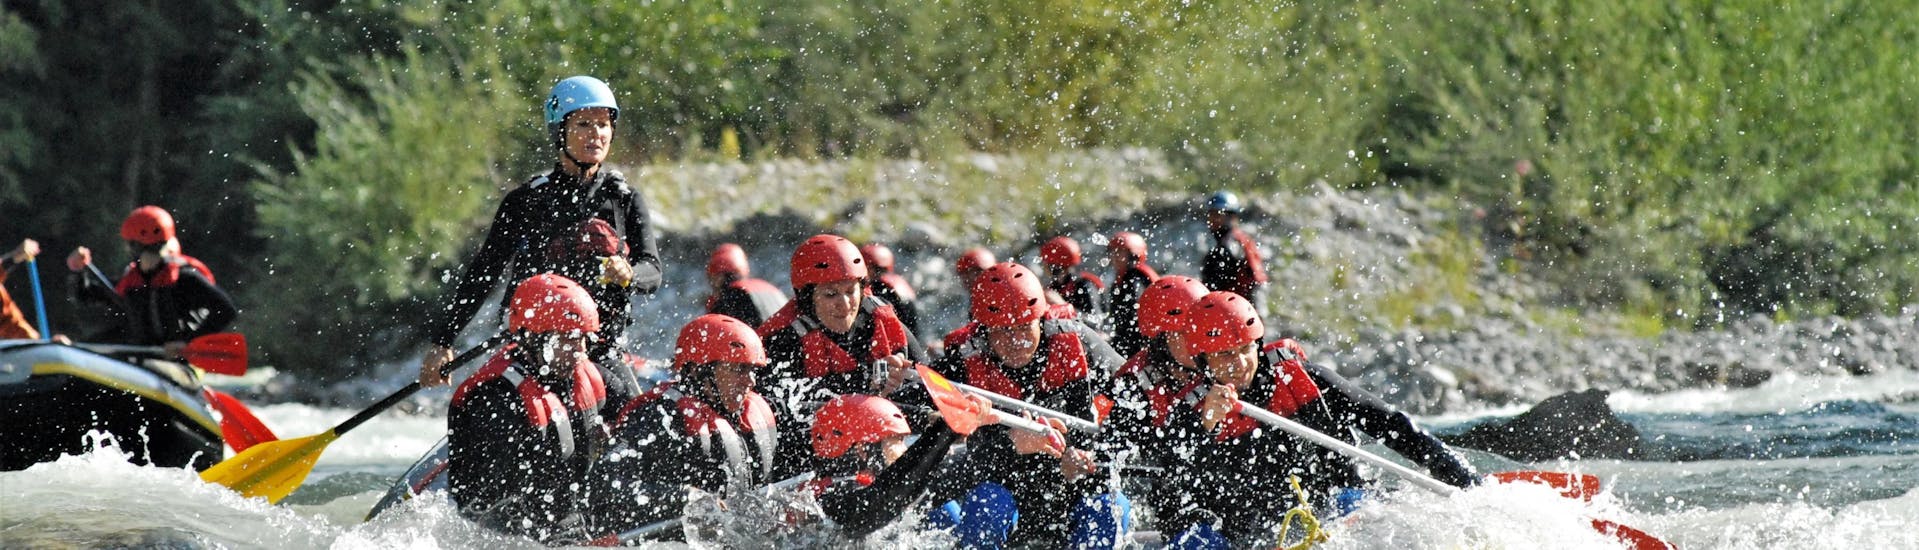 The guests of outdoor center Baumgarten have a lot of fun during the rafting on the Saalach river in Schneizlreuth.